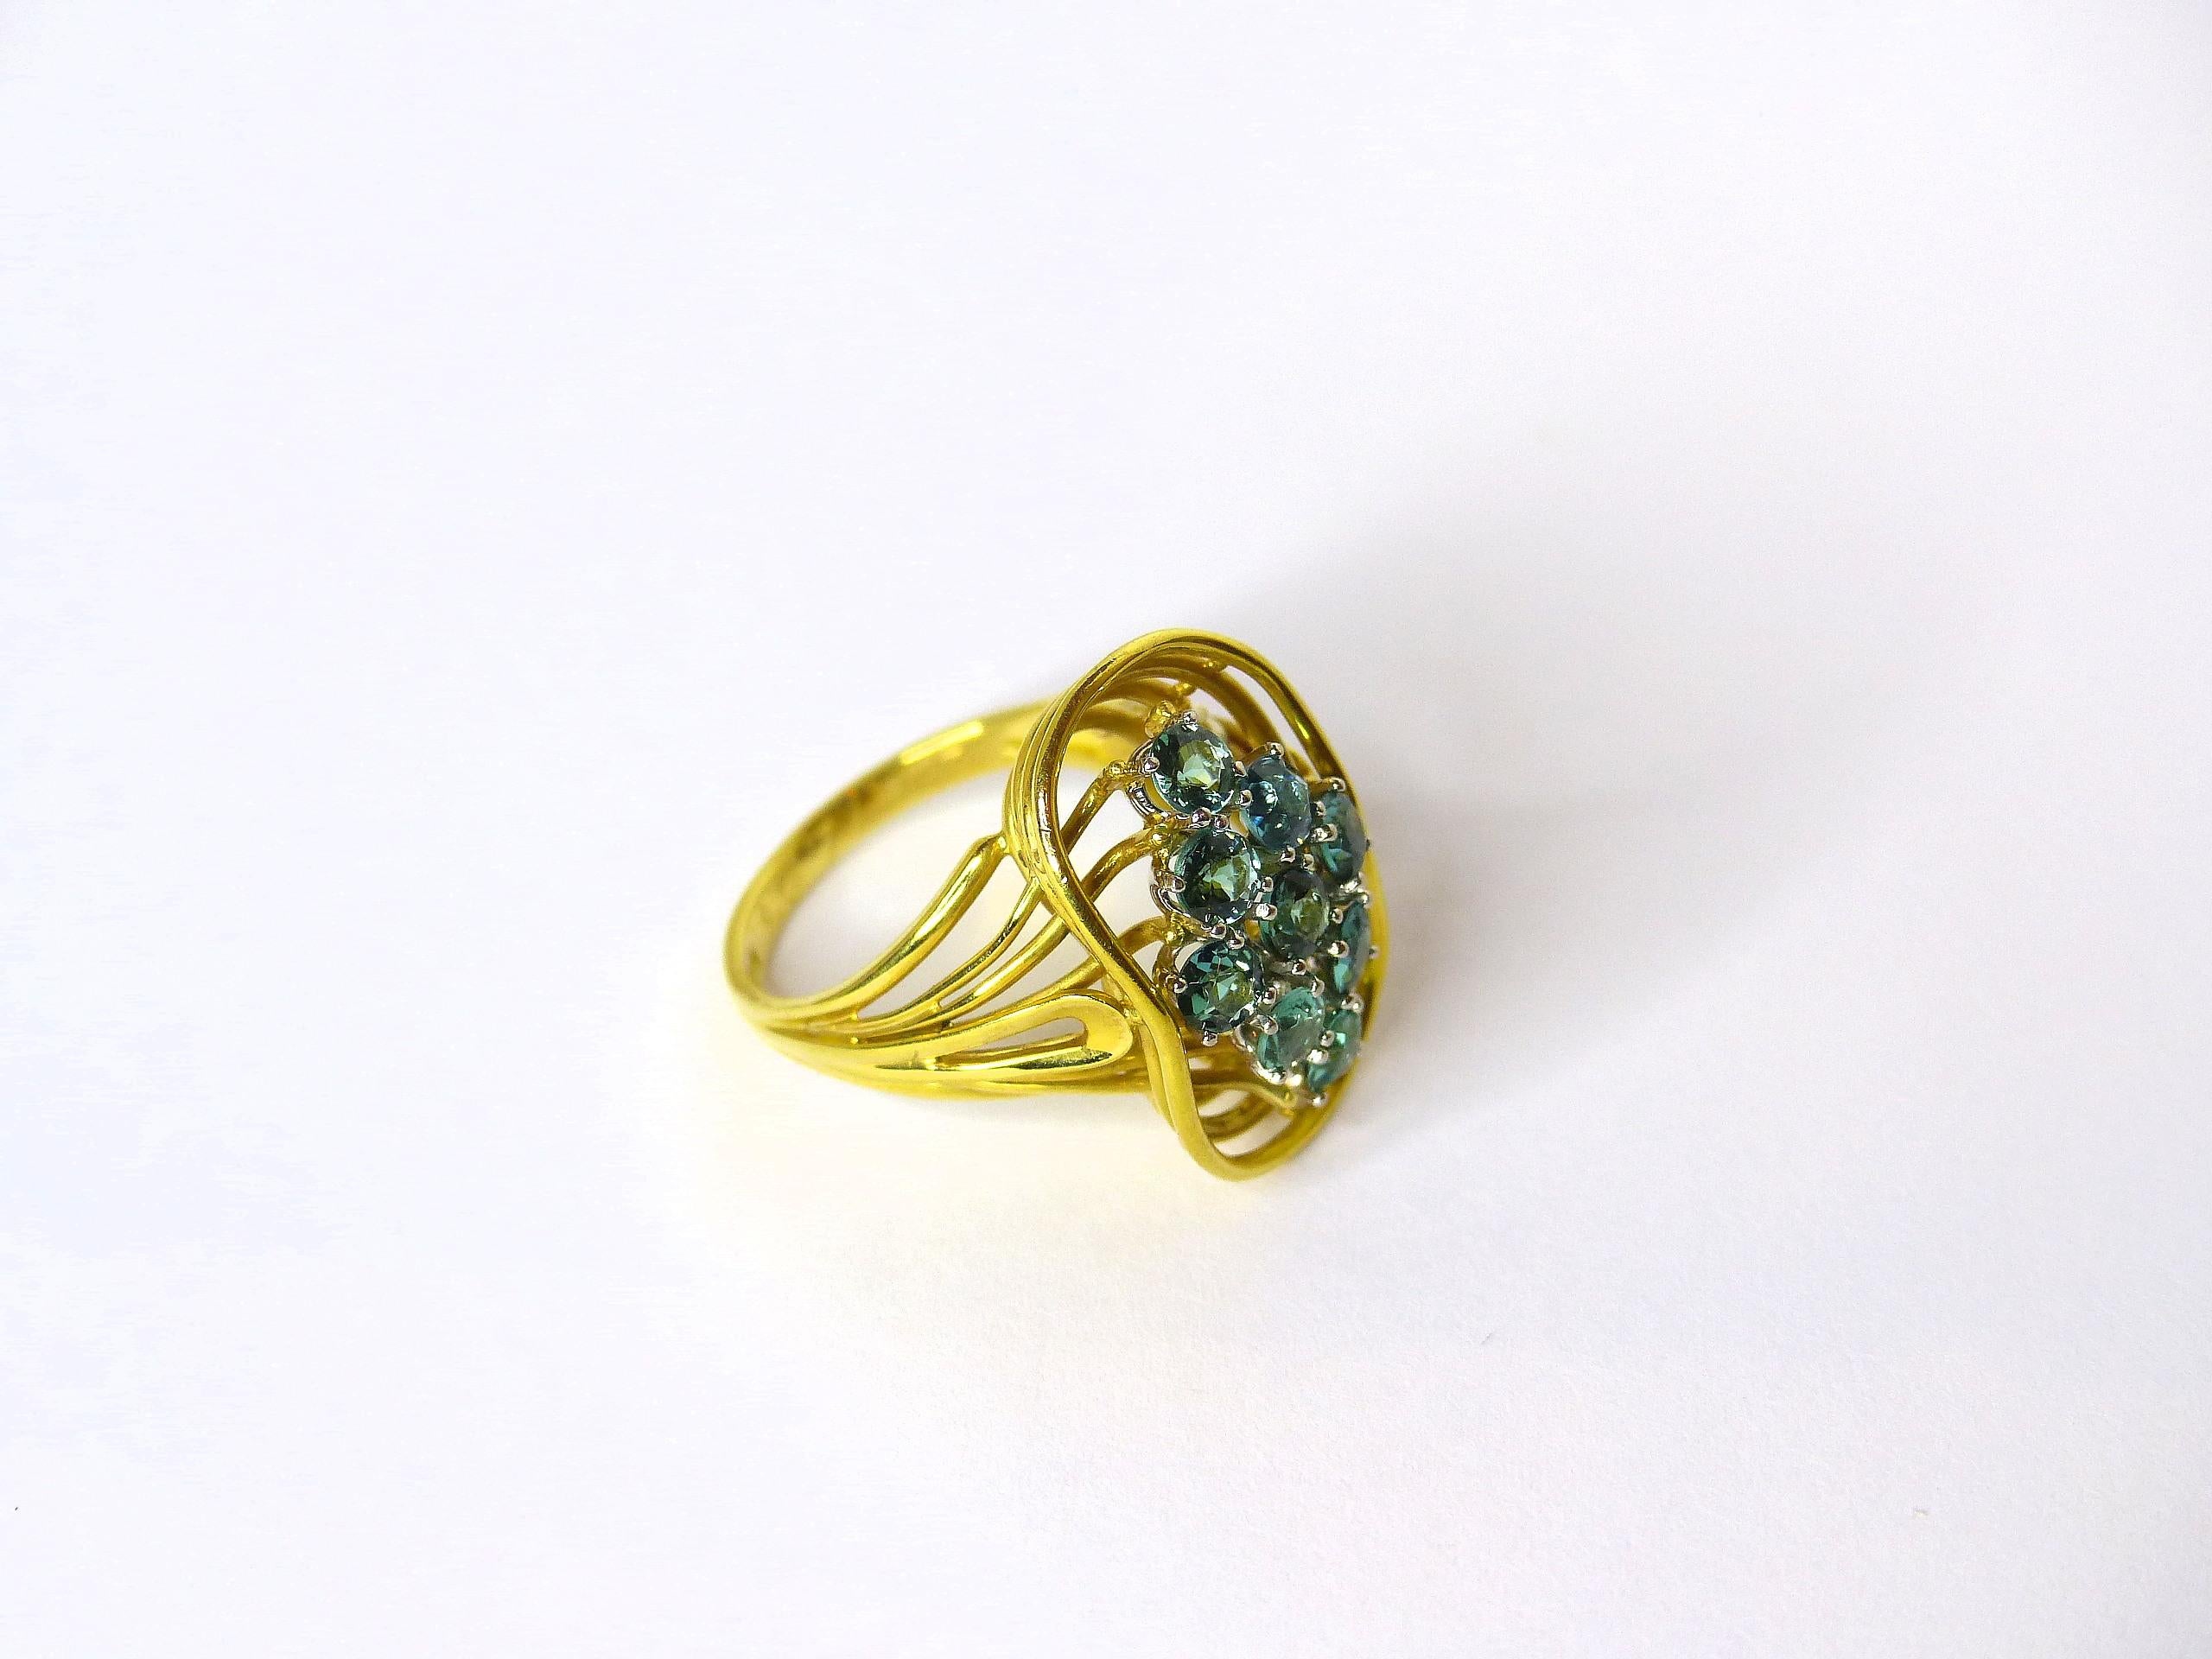 Thomas Leyser is renowned for his contemporary jewellery designs utilizing fine gemstones.

This 14k yellow gold ring 8,52gr. is set with 9 top quality Tourmalines in magnificient colour with intensiv blueish/greenish colour with Namibia origin,